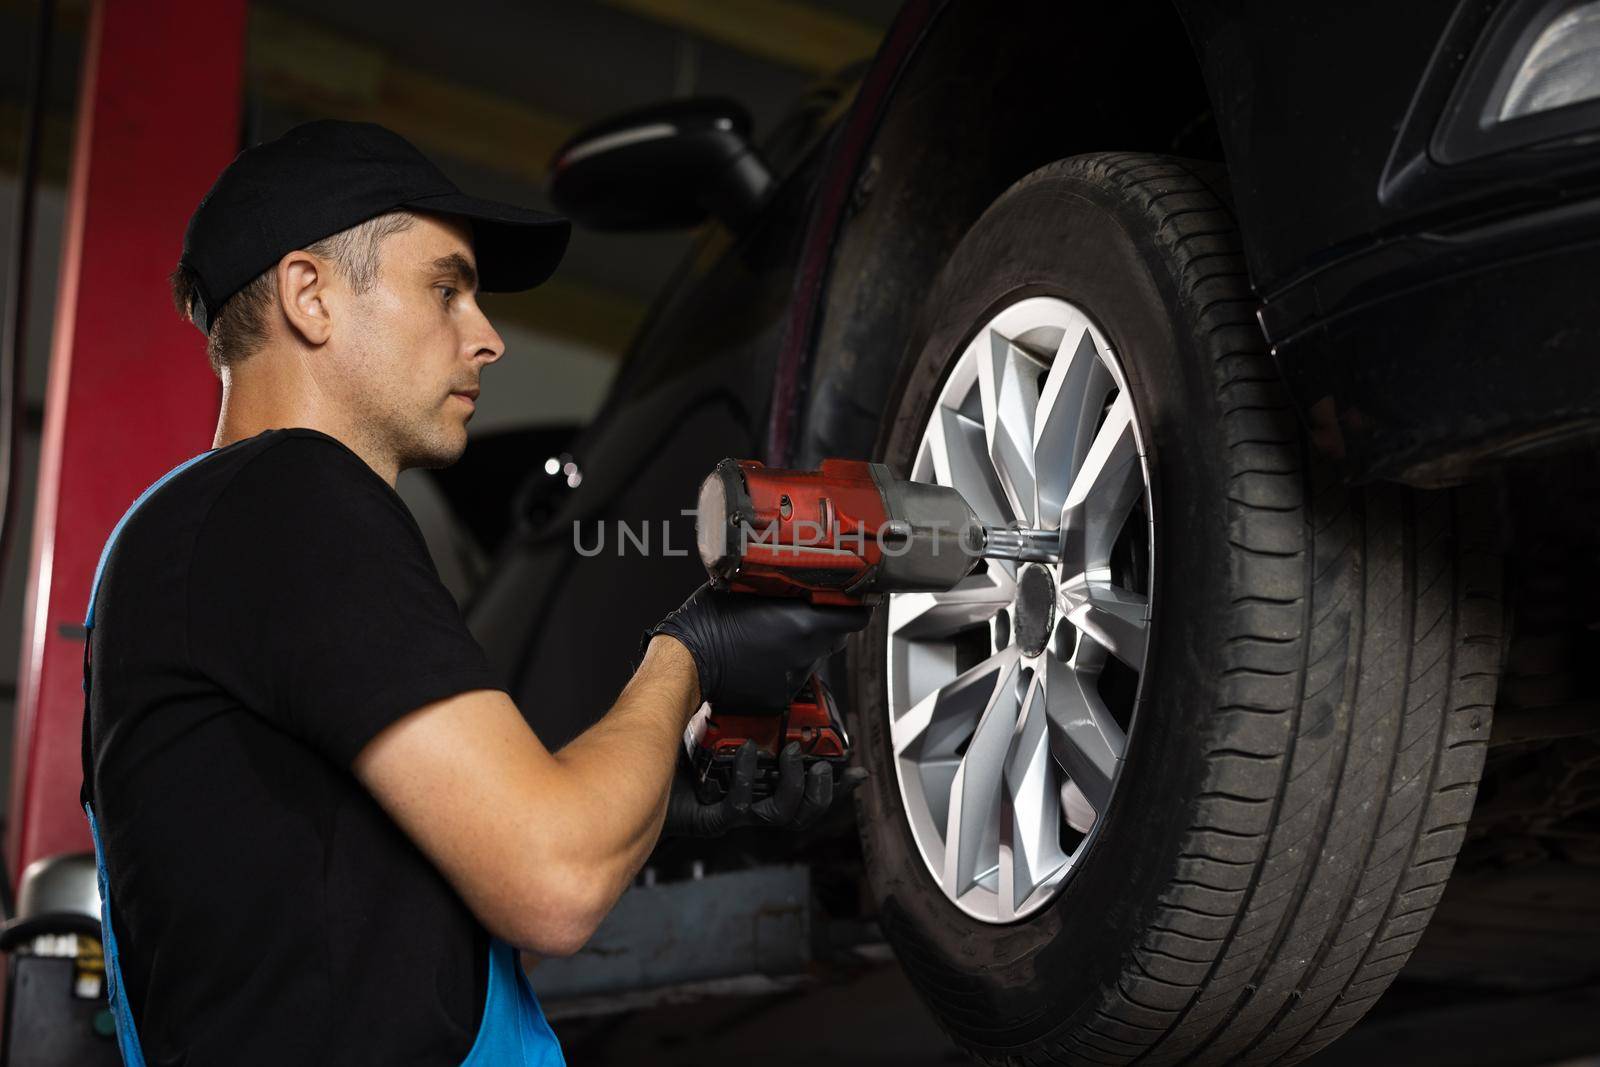 Mechanic is Unscrewing Lug Nuts with Pneumatic Impact Wrench. Repairman Works in a Modern Car Service. Specialists Removes the Wheel in Order to Fix a Component on a Vehicle.